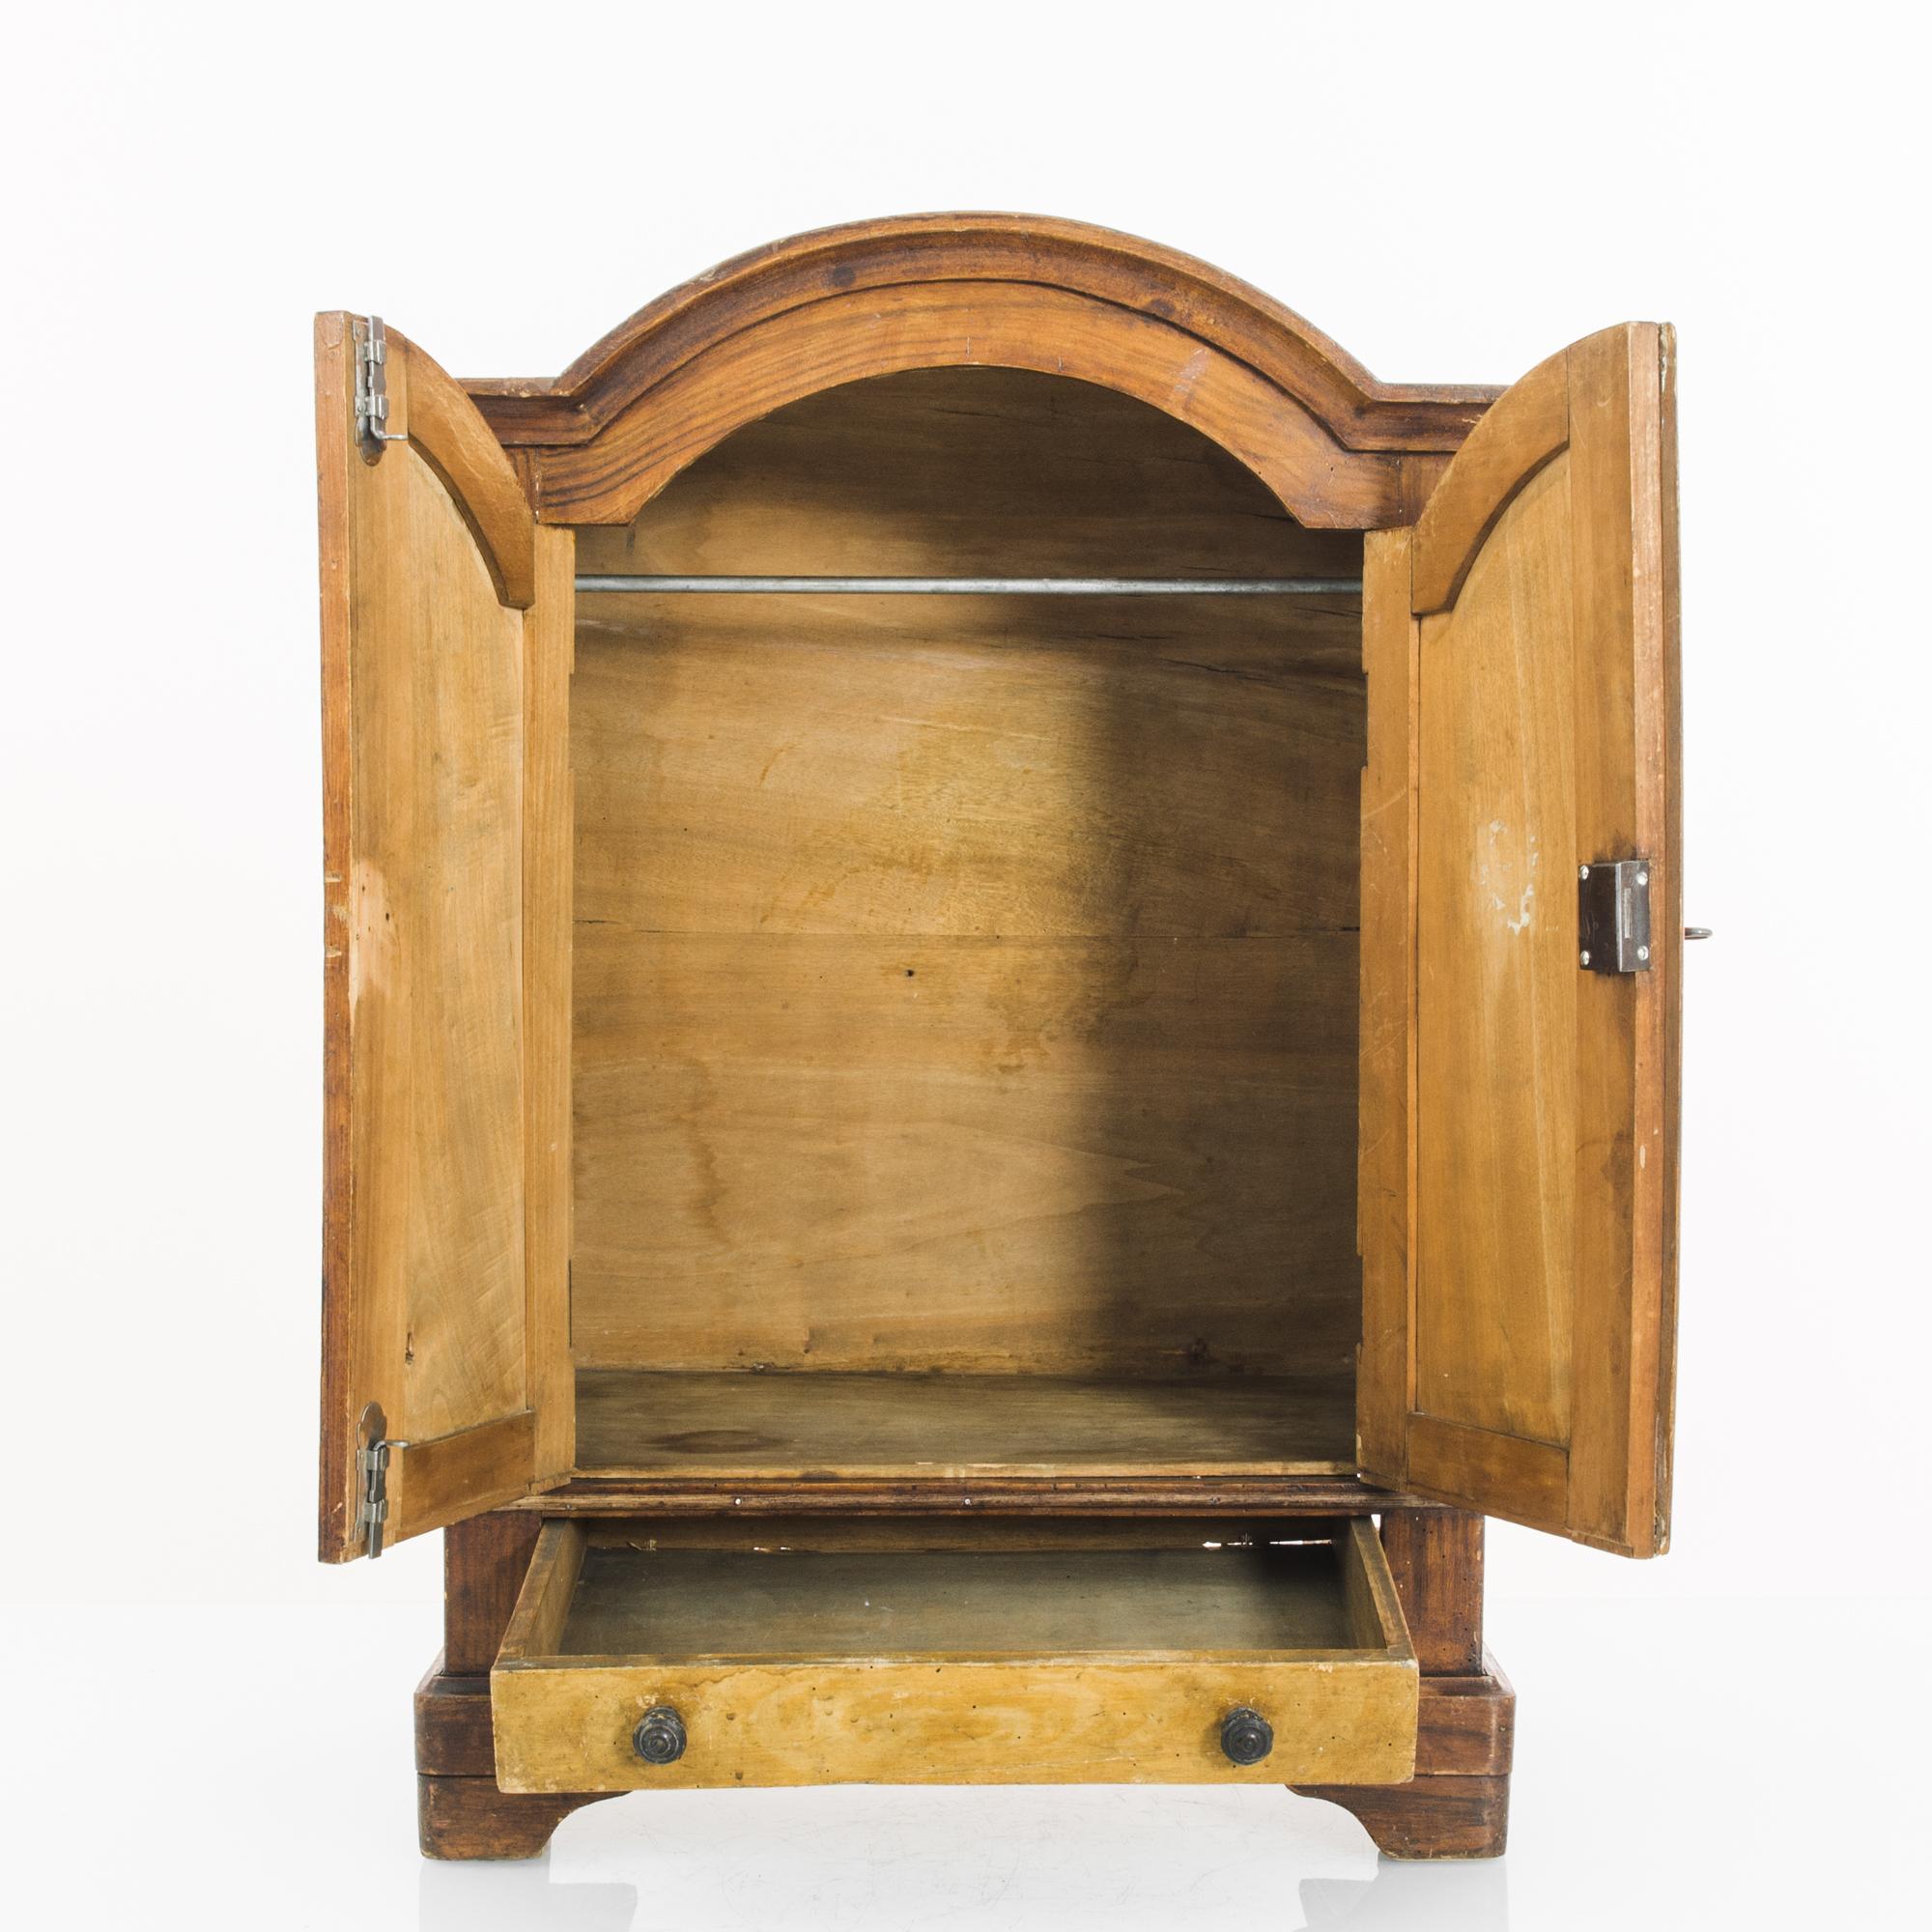 Transport your space to the refined elegance of the 1880s with this French wooden small cabinet. The two main doors swing open, revealing an open storage space equipped with a metal bar, perfect for hanging your clothing collection. A convenient